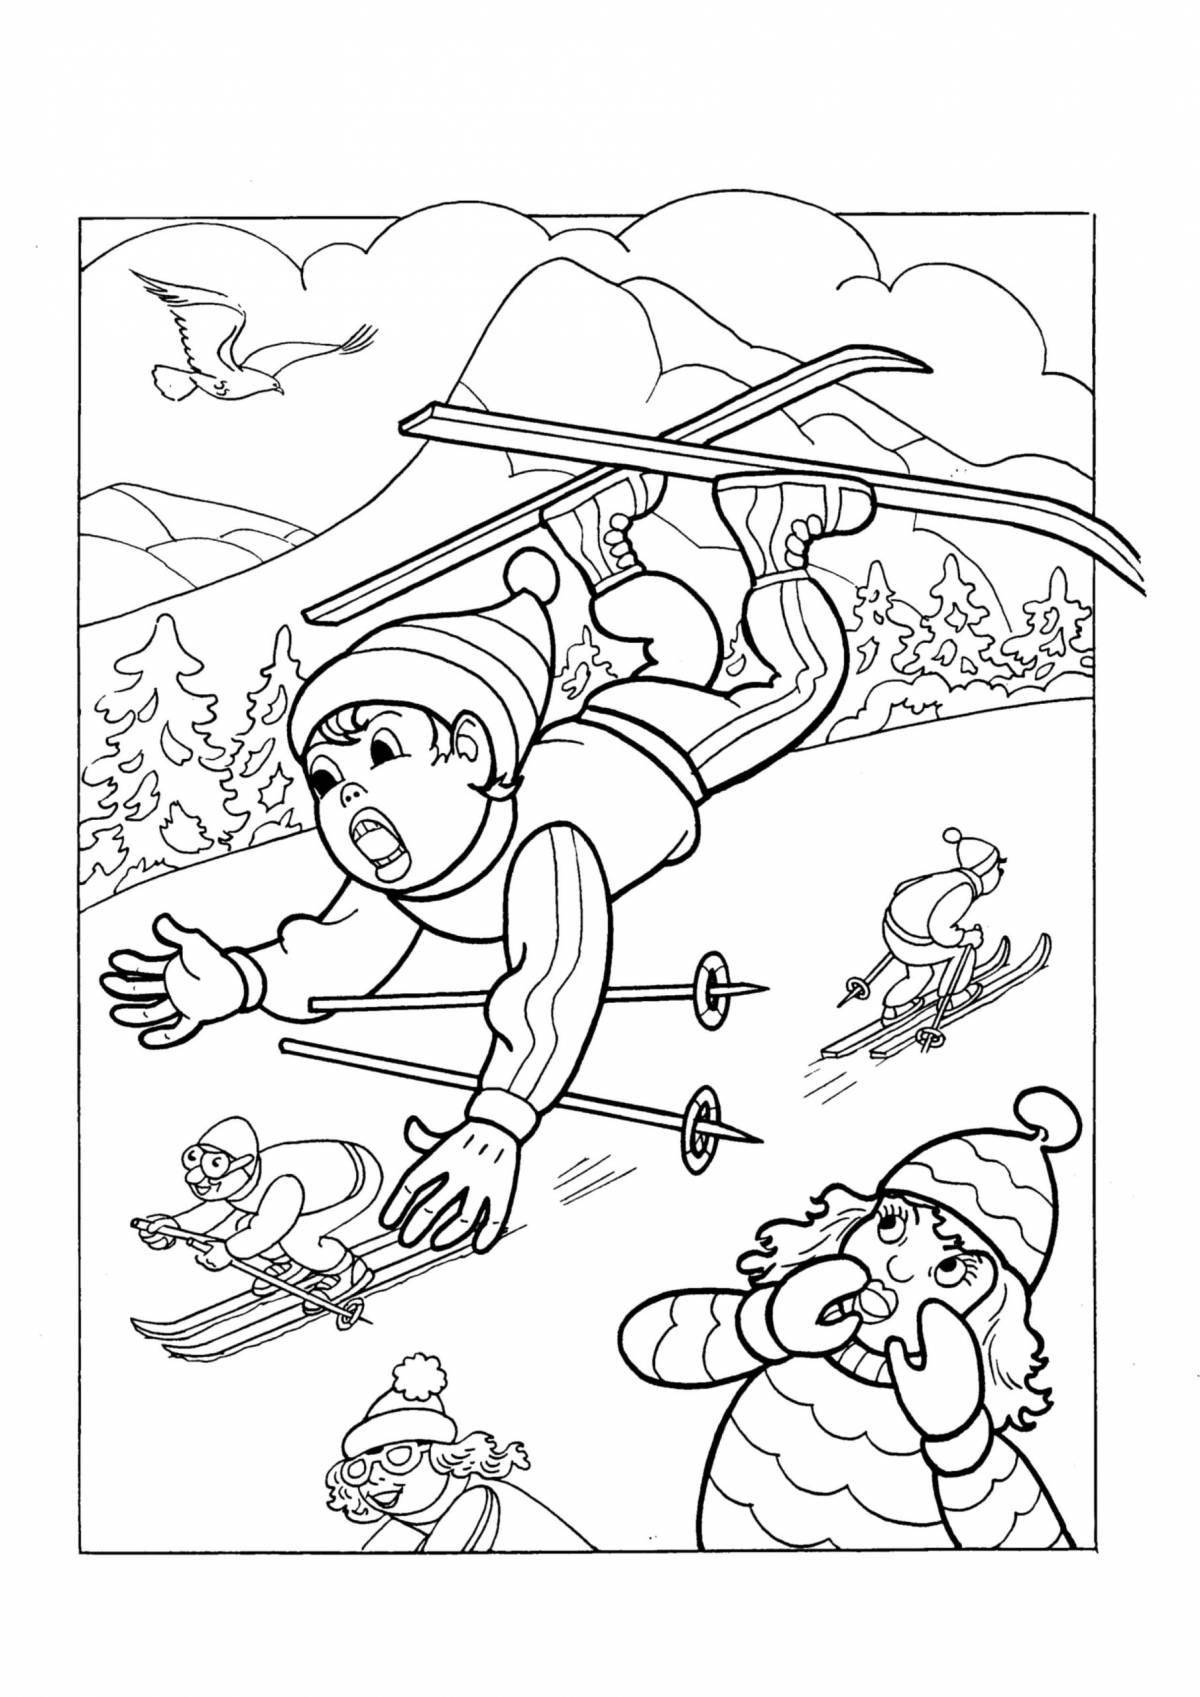 Vivified coloring page winter safety